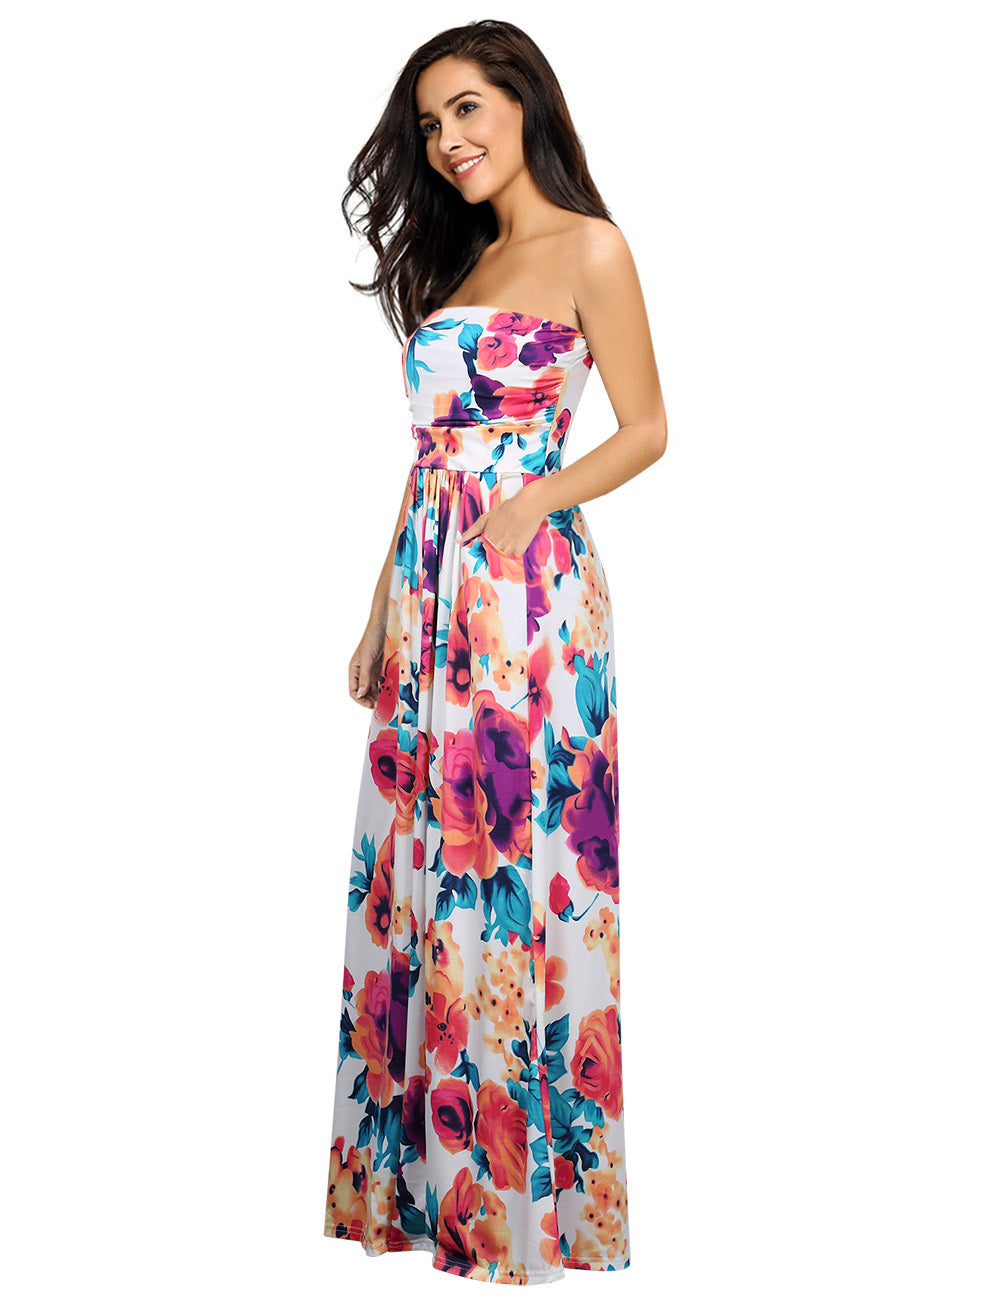 YESFASHION Women Ruched Strapless Maxi Vintage Floral Print Long Dress